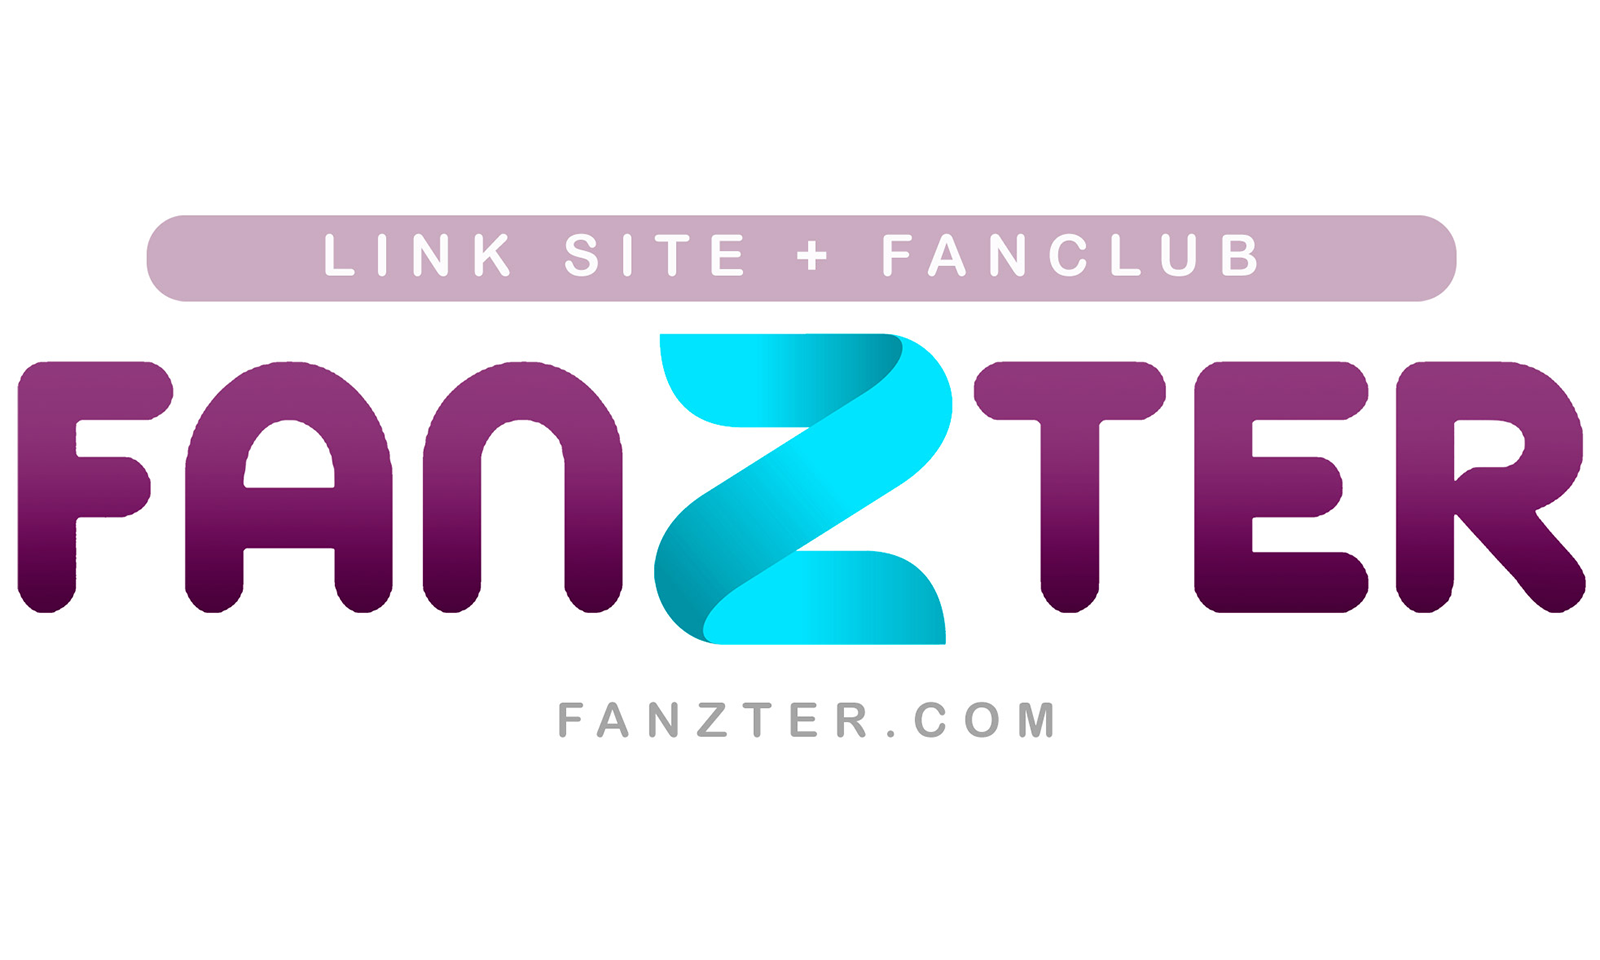 All-in-One Creator Platform Fanzter Launches